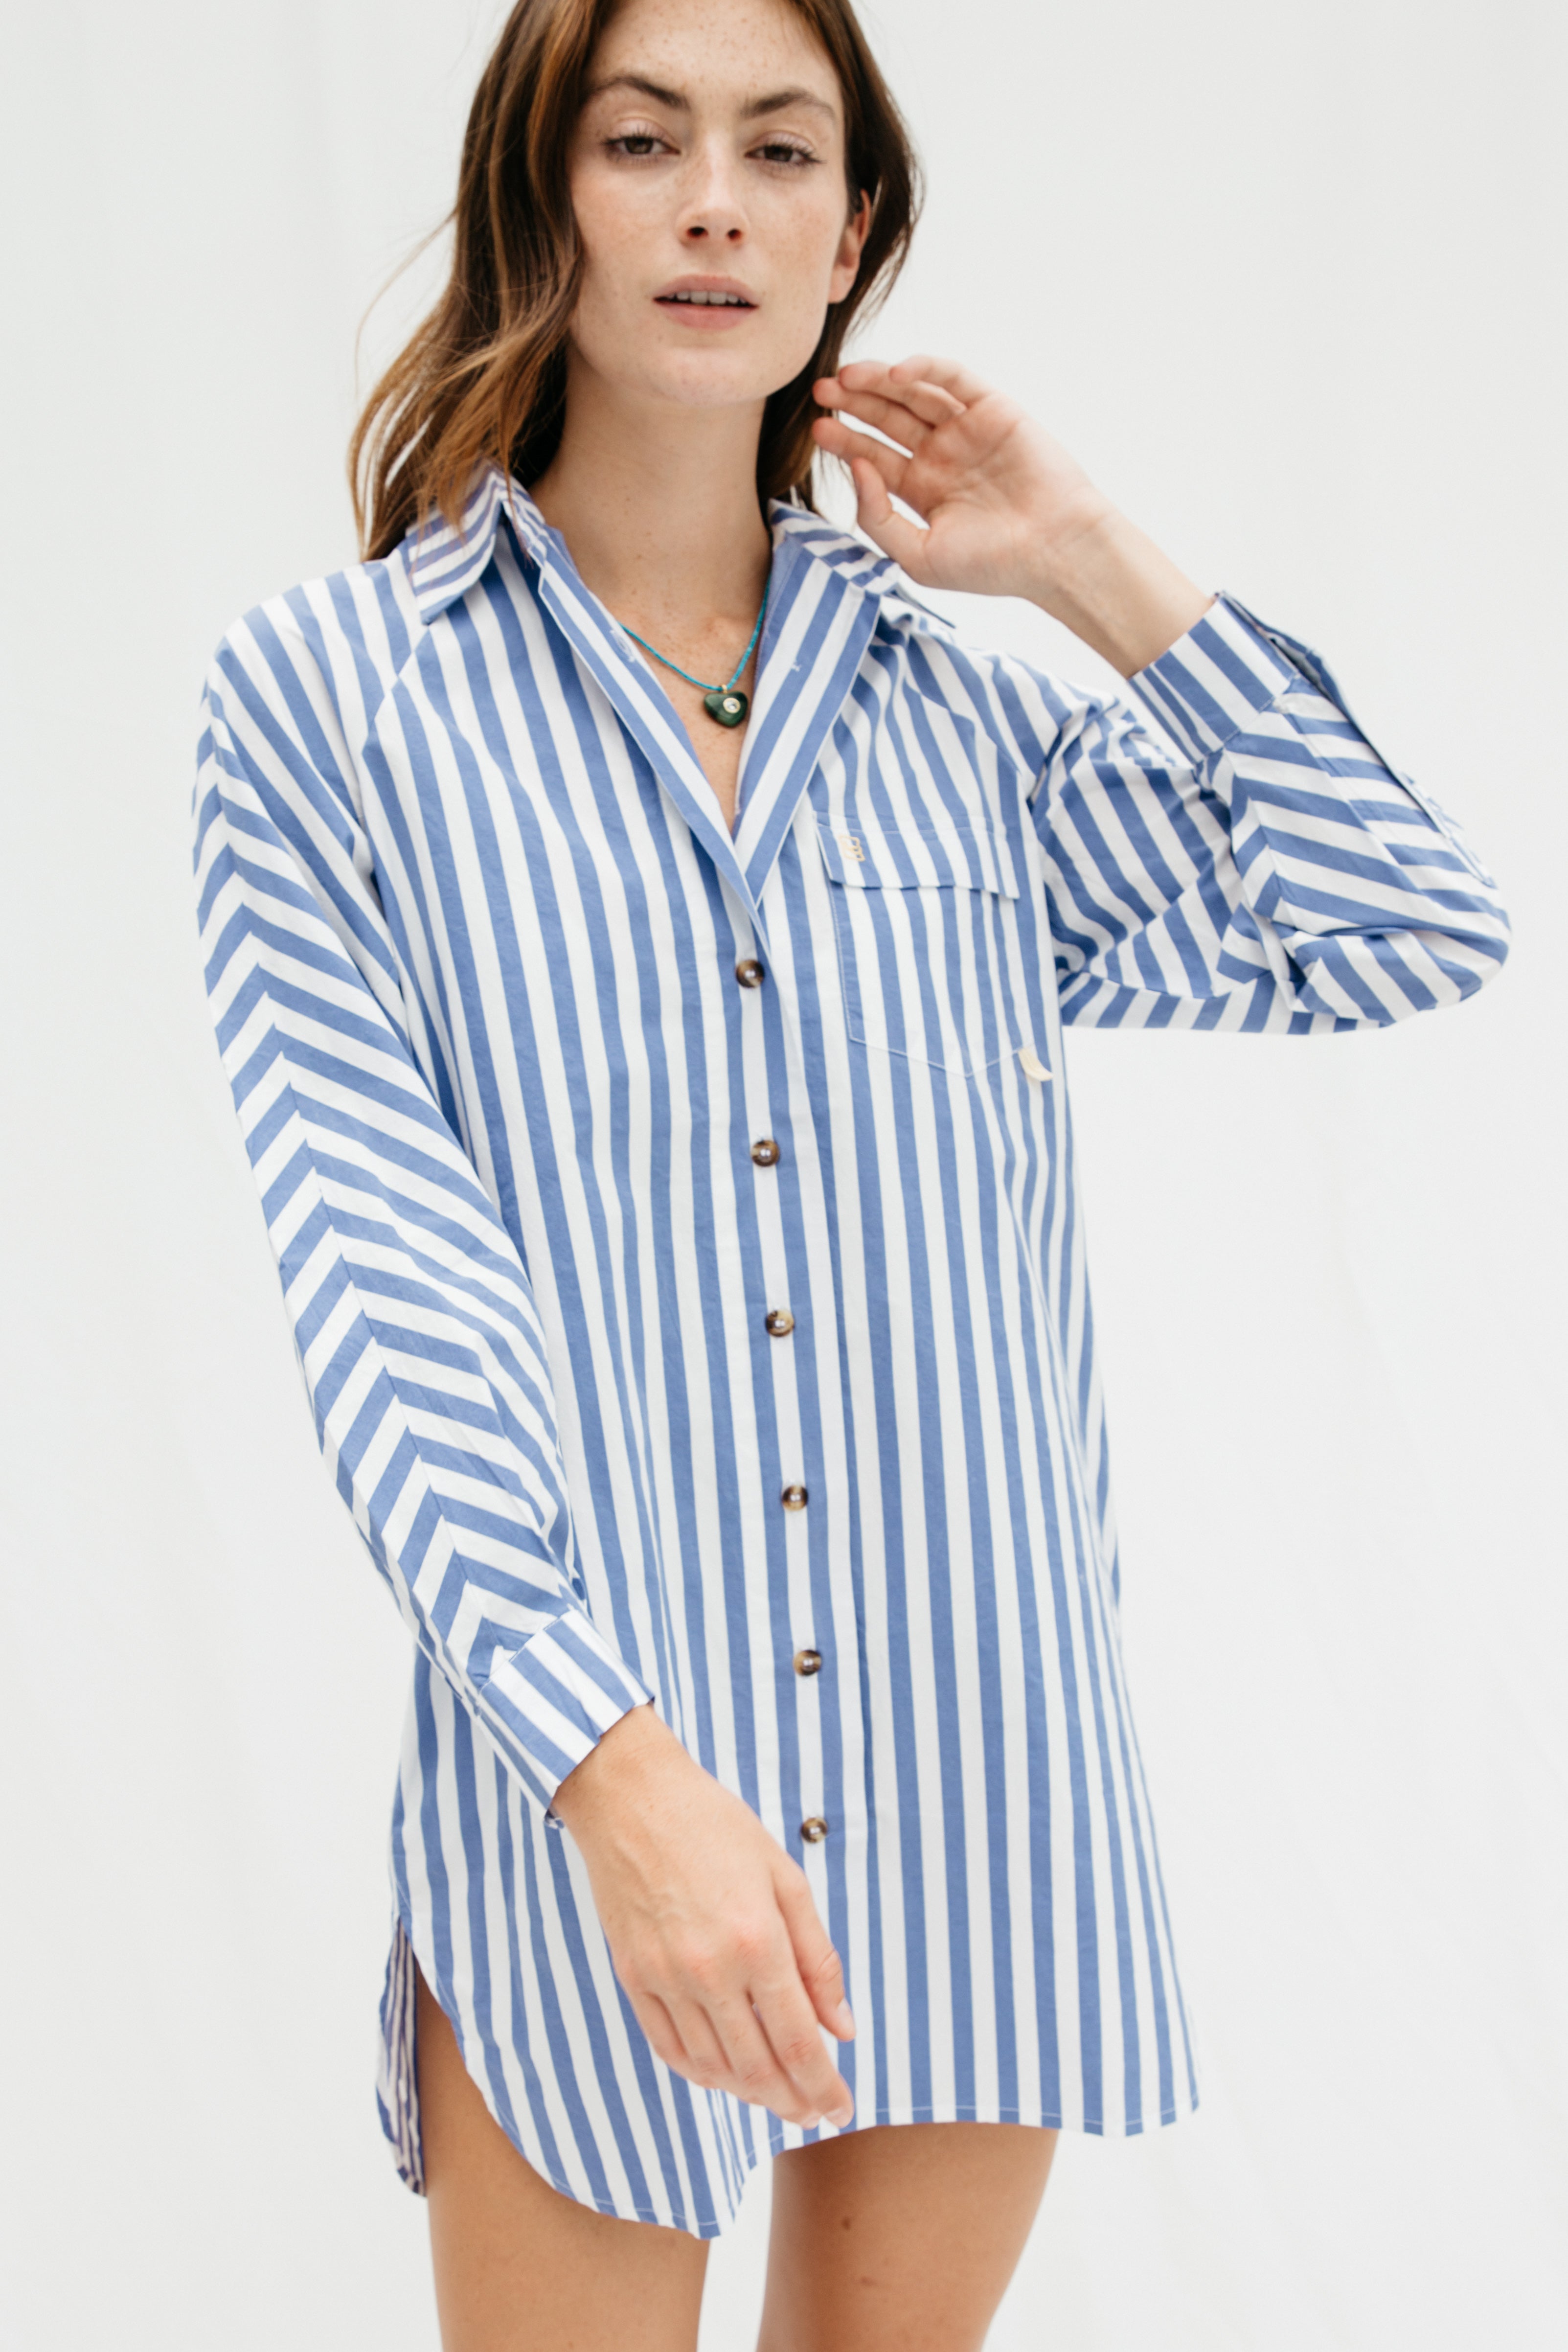 Women's Fishing Shirtdress Cover-Up in Blue Stripe by Lady Captain Extra Large / Blue Stripe